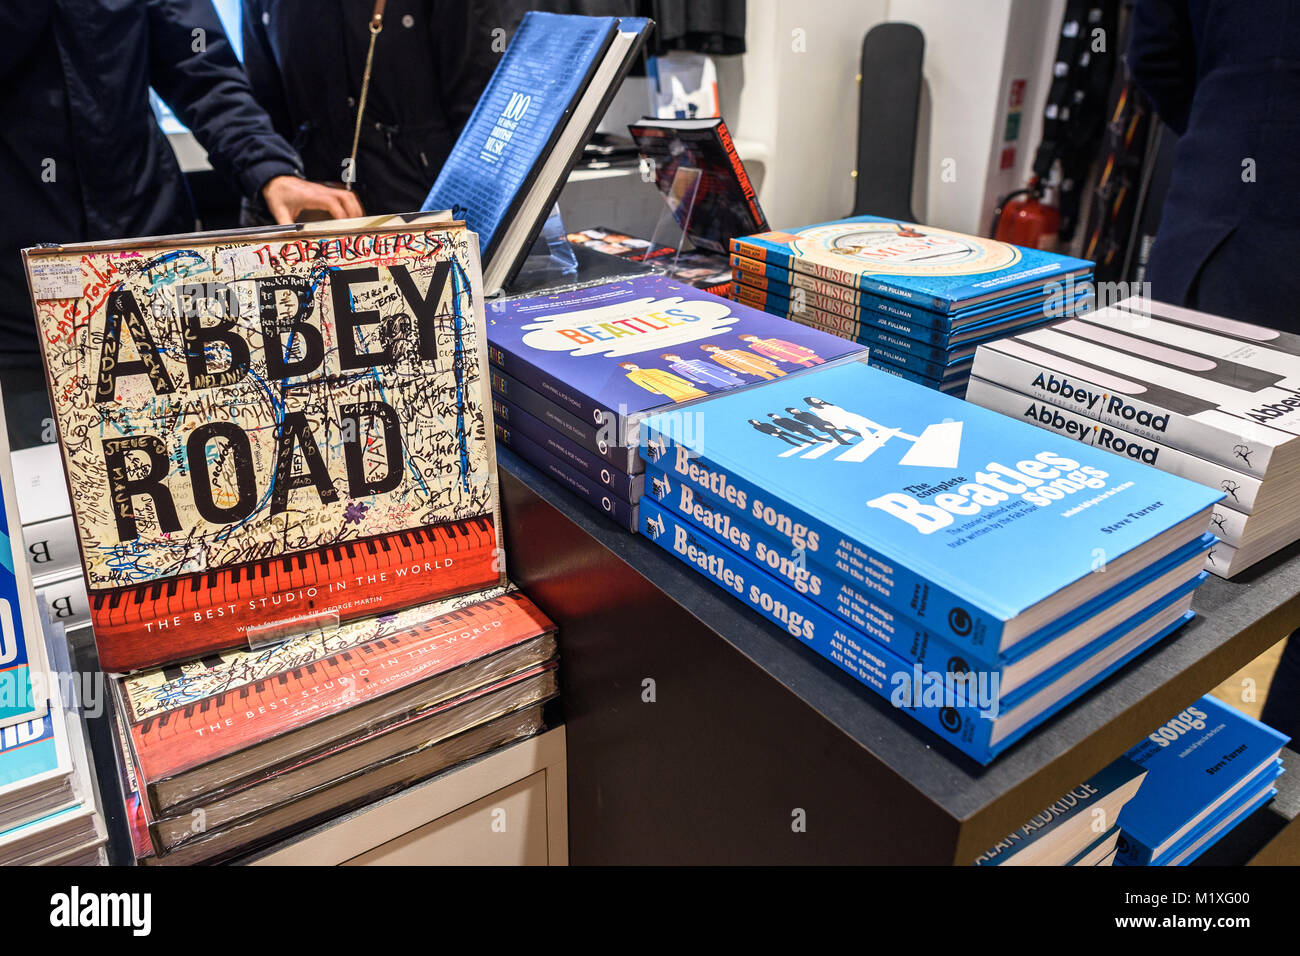 The Abbey Road shop selling various music related gifts, including Beatles related books. Stock Photo